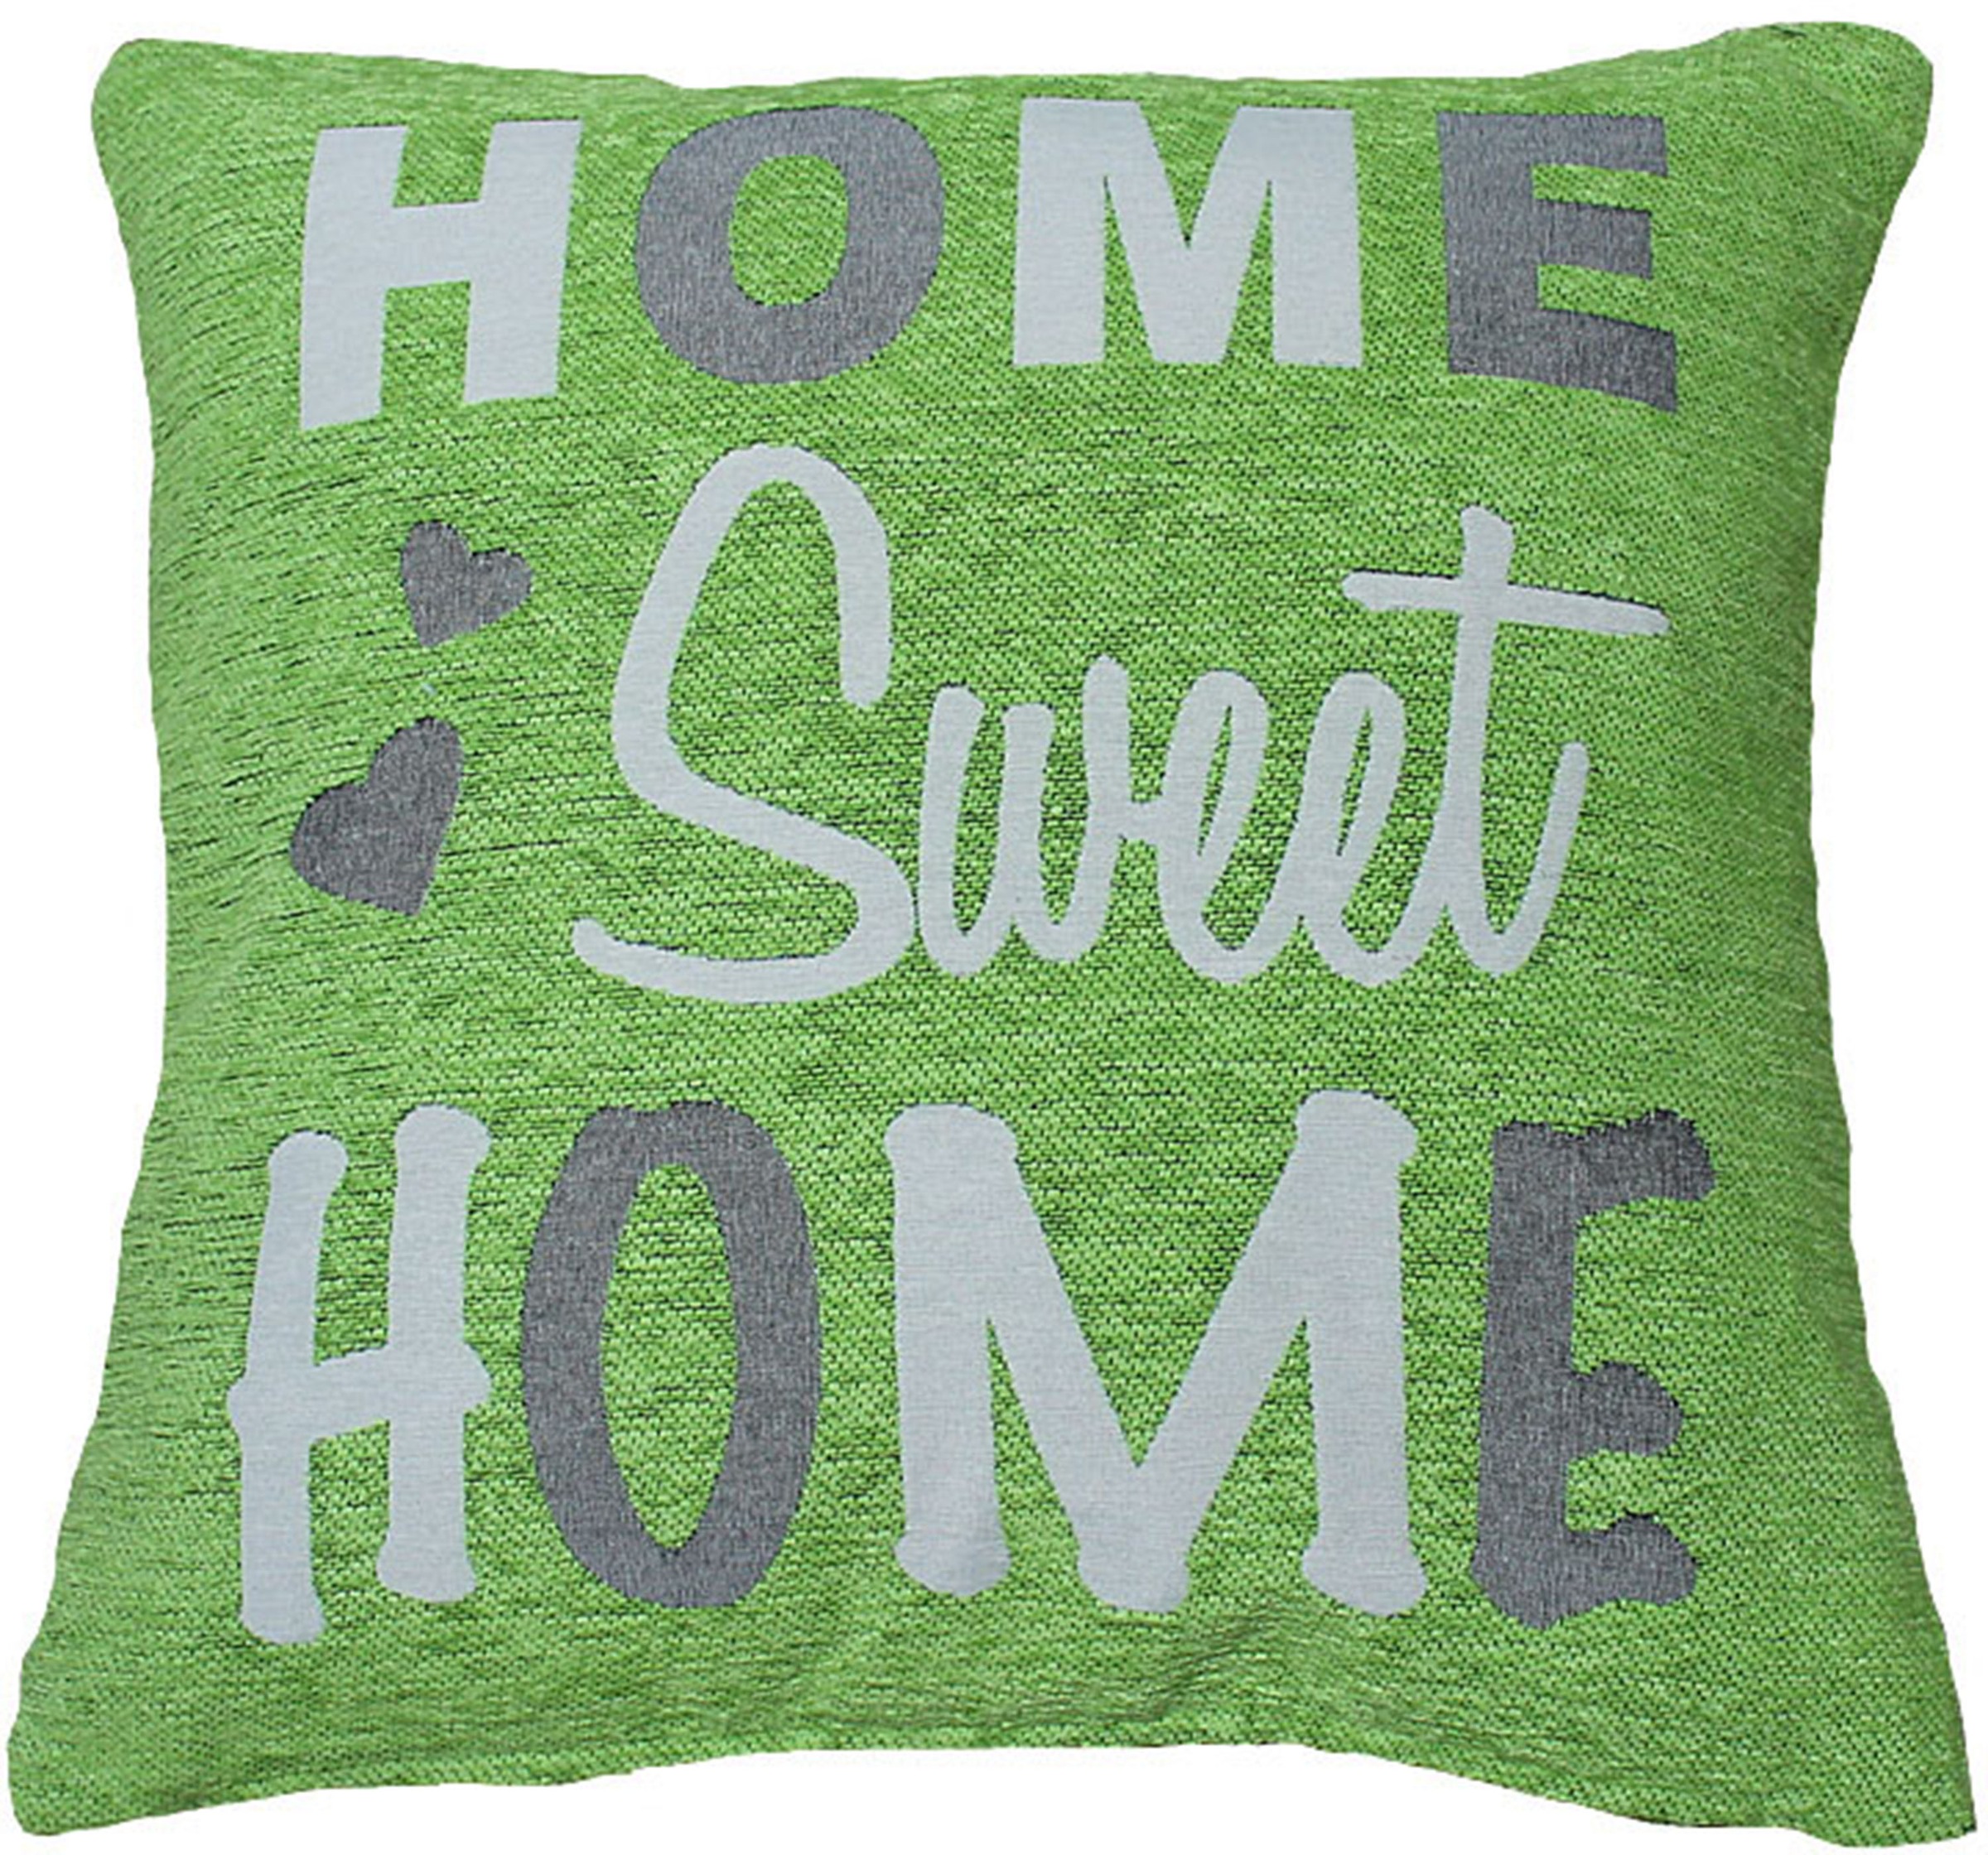 - »Home HOSSNER St.) Home«, HOMECOLLECTION Sweet (2 Kissenhülle